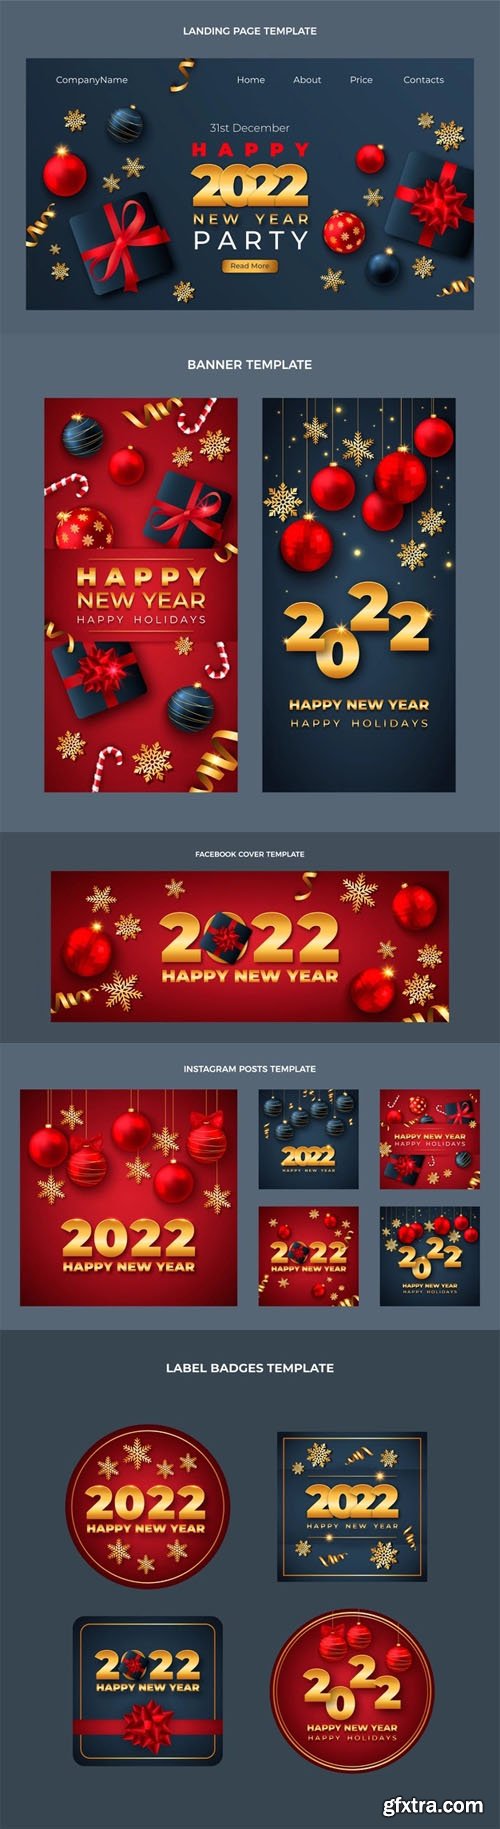 Realistic Happy New Year 2022 Vector Templates Collection